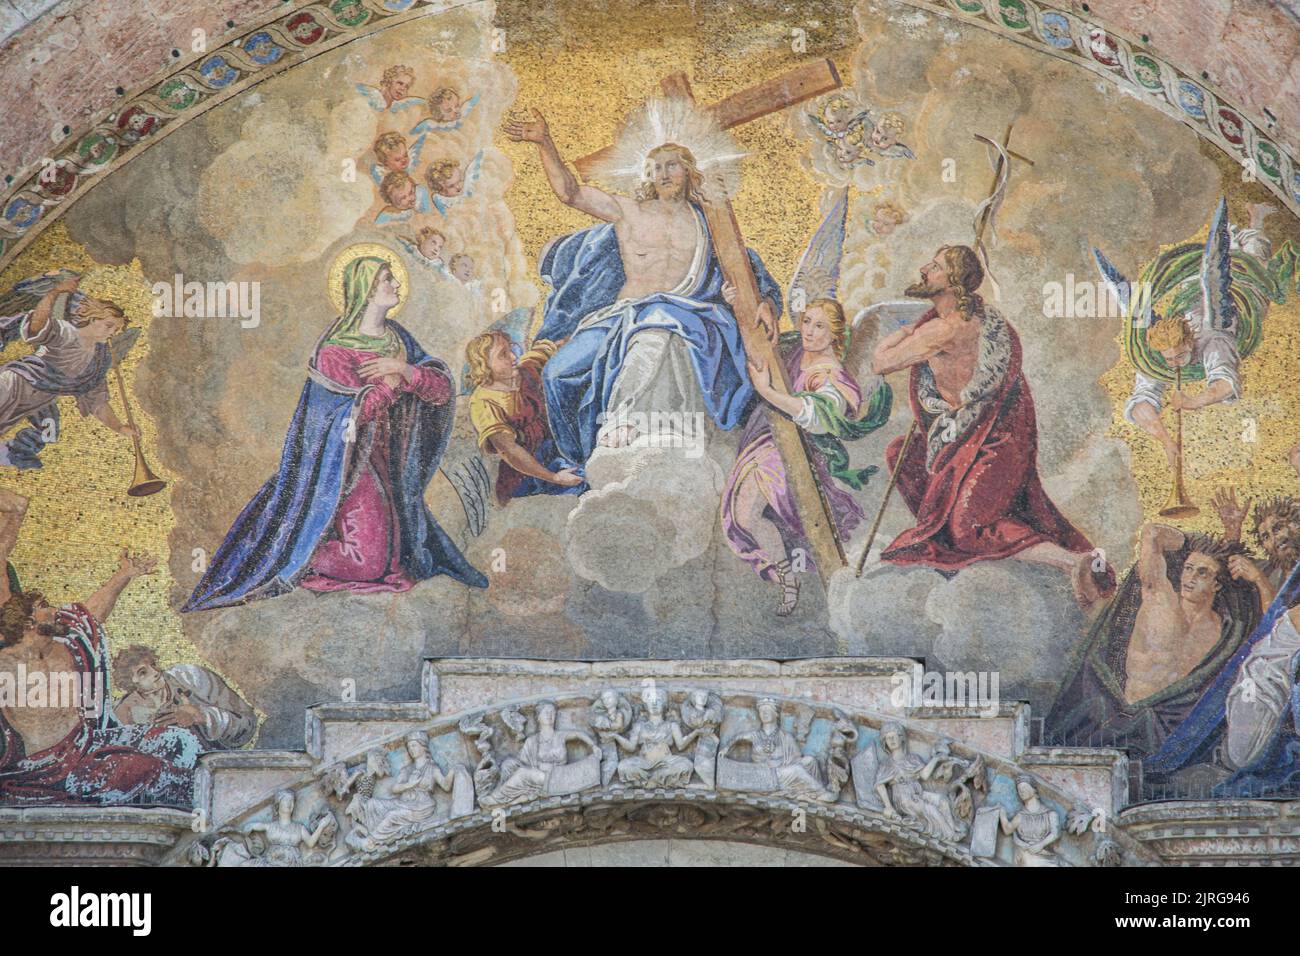 St Mark`s Basilica close-up, Venice, Italy. It is top landmark in Venice. Beautiful luxury mosaic portal, image of Christ and cross. Stock Photo